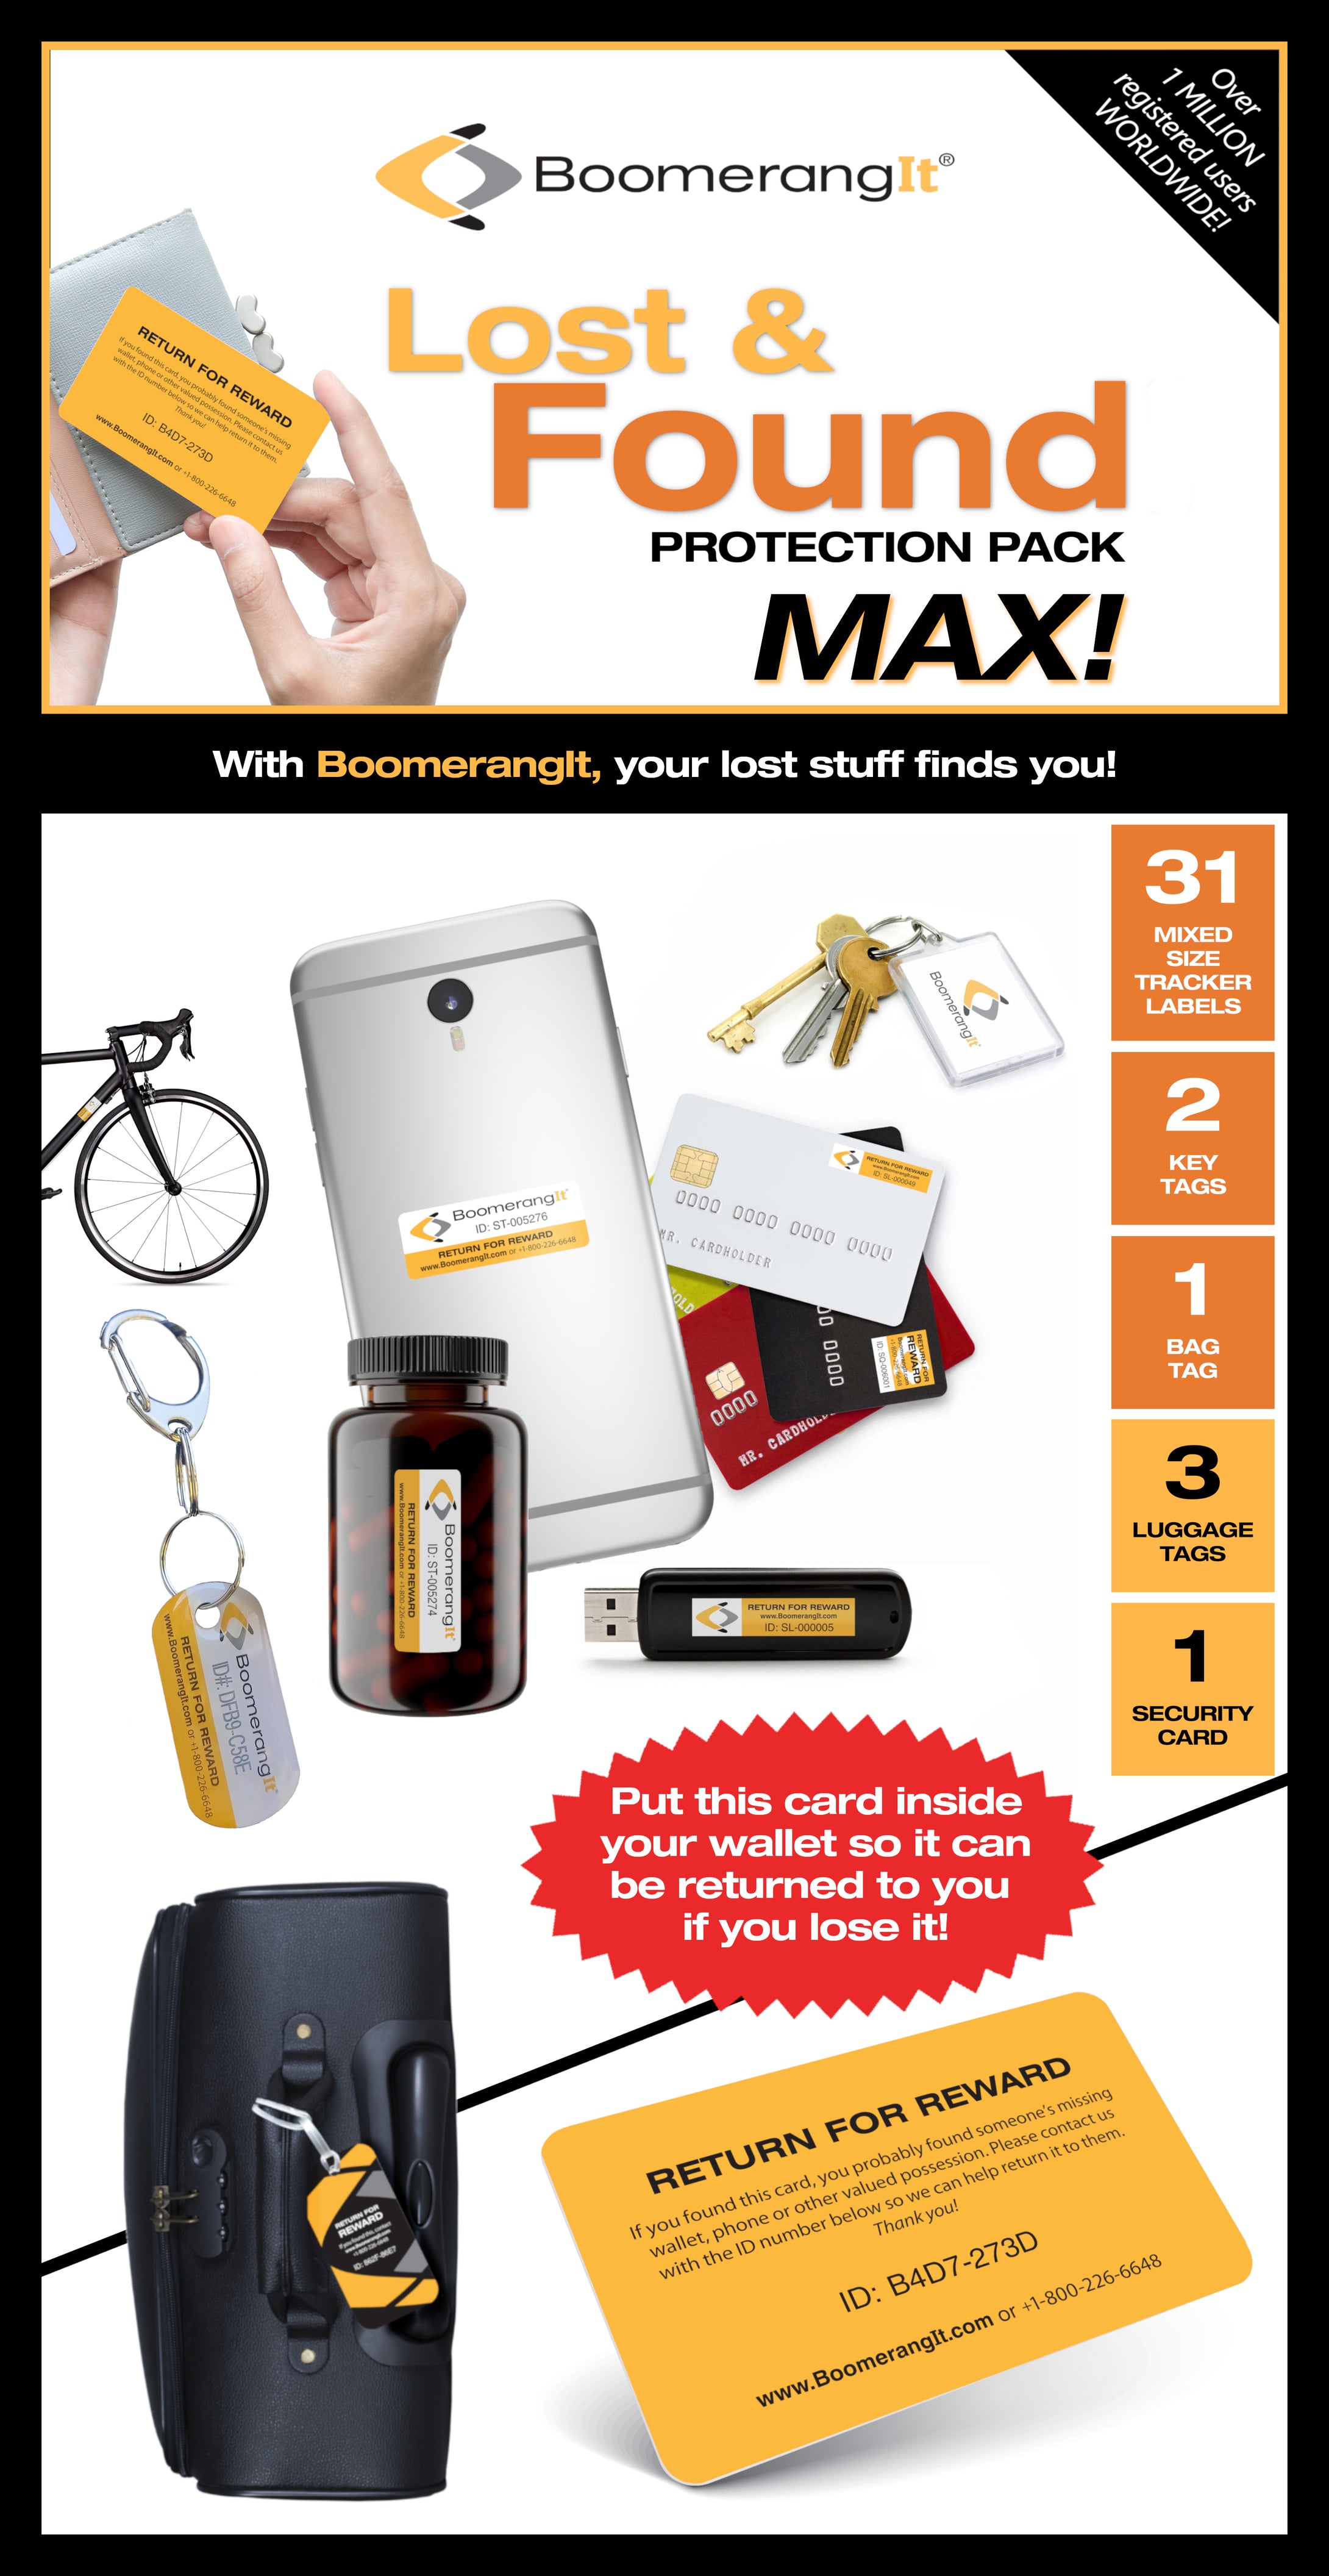 MAX! Protection Pack + Lost & Found Return Service